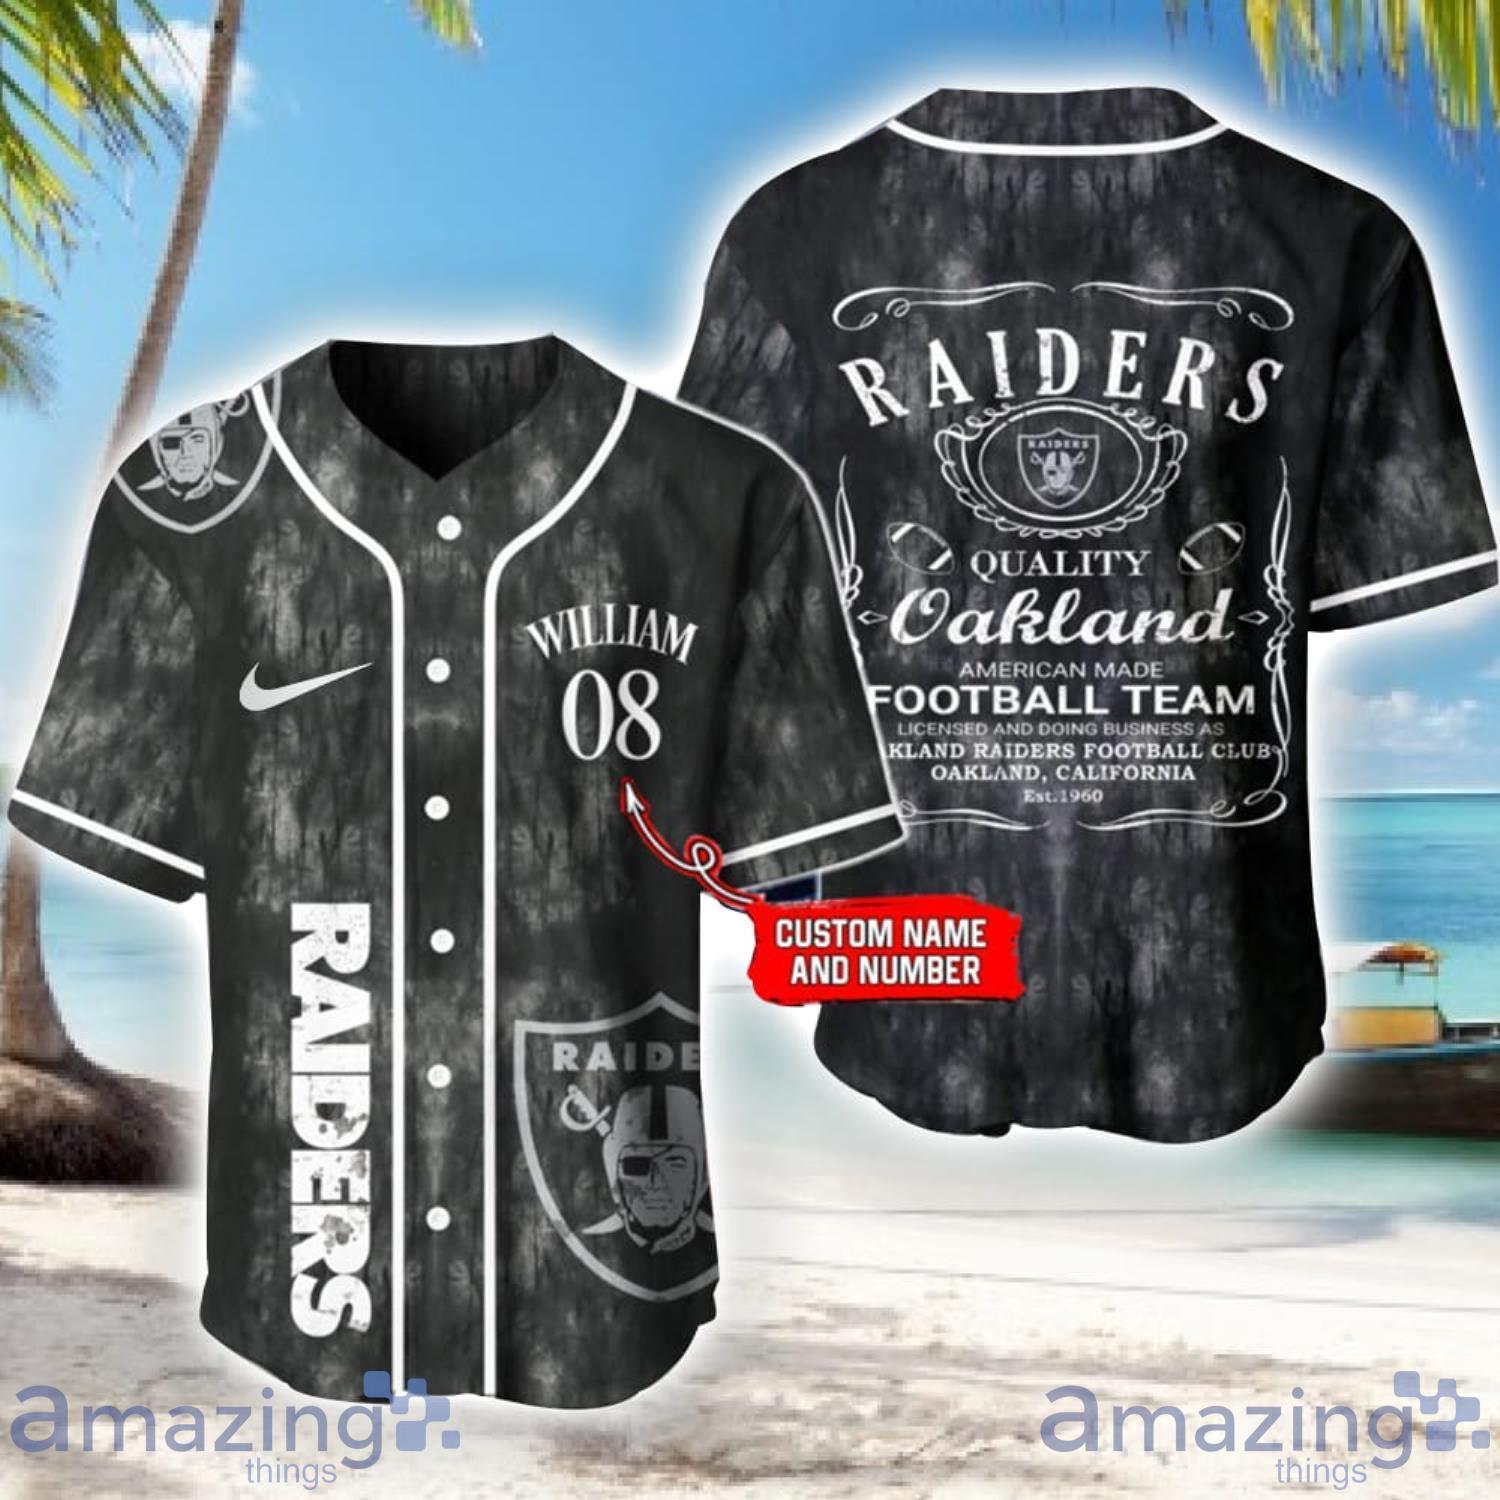 Las Vegas Raiders Personalized Name And Number NFL 3D Baseball Jersey Shirt  For Fans